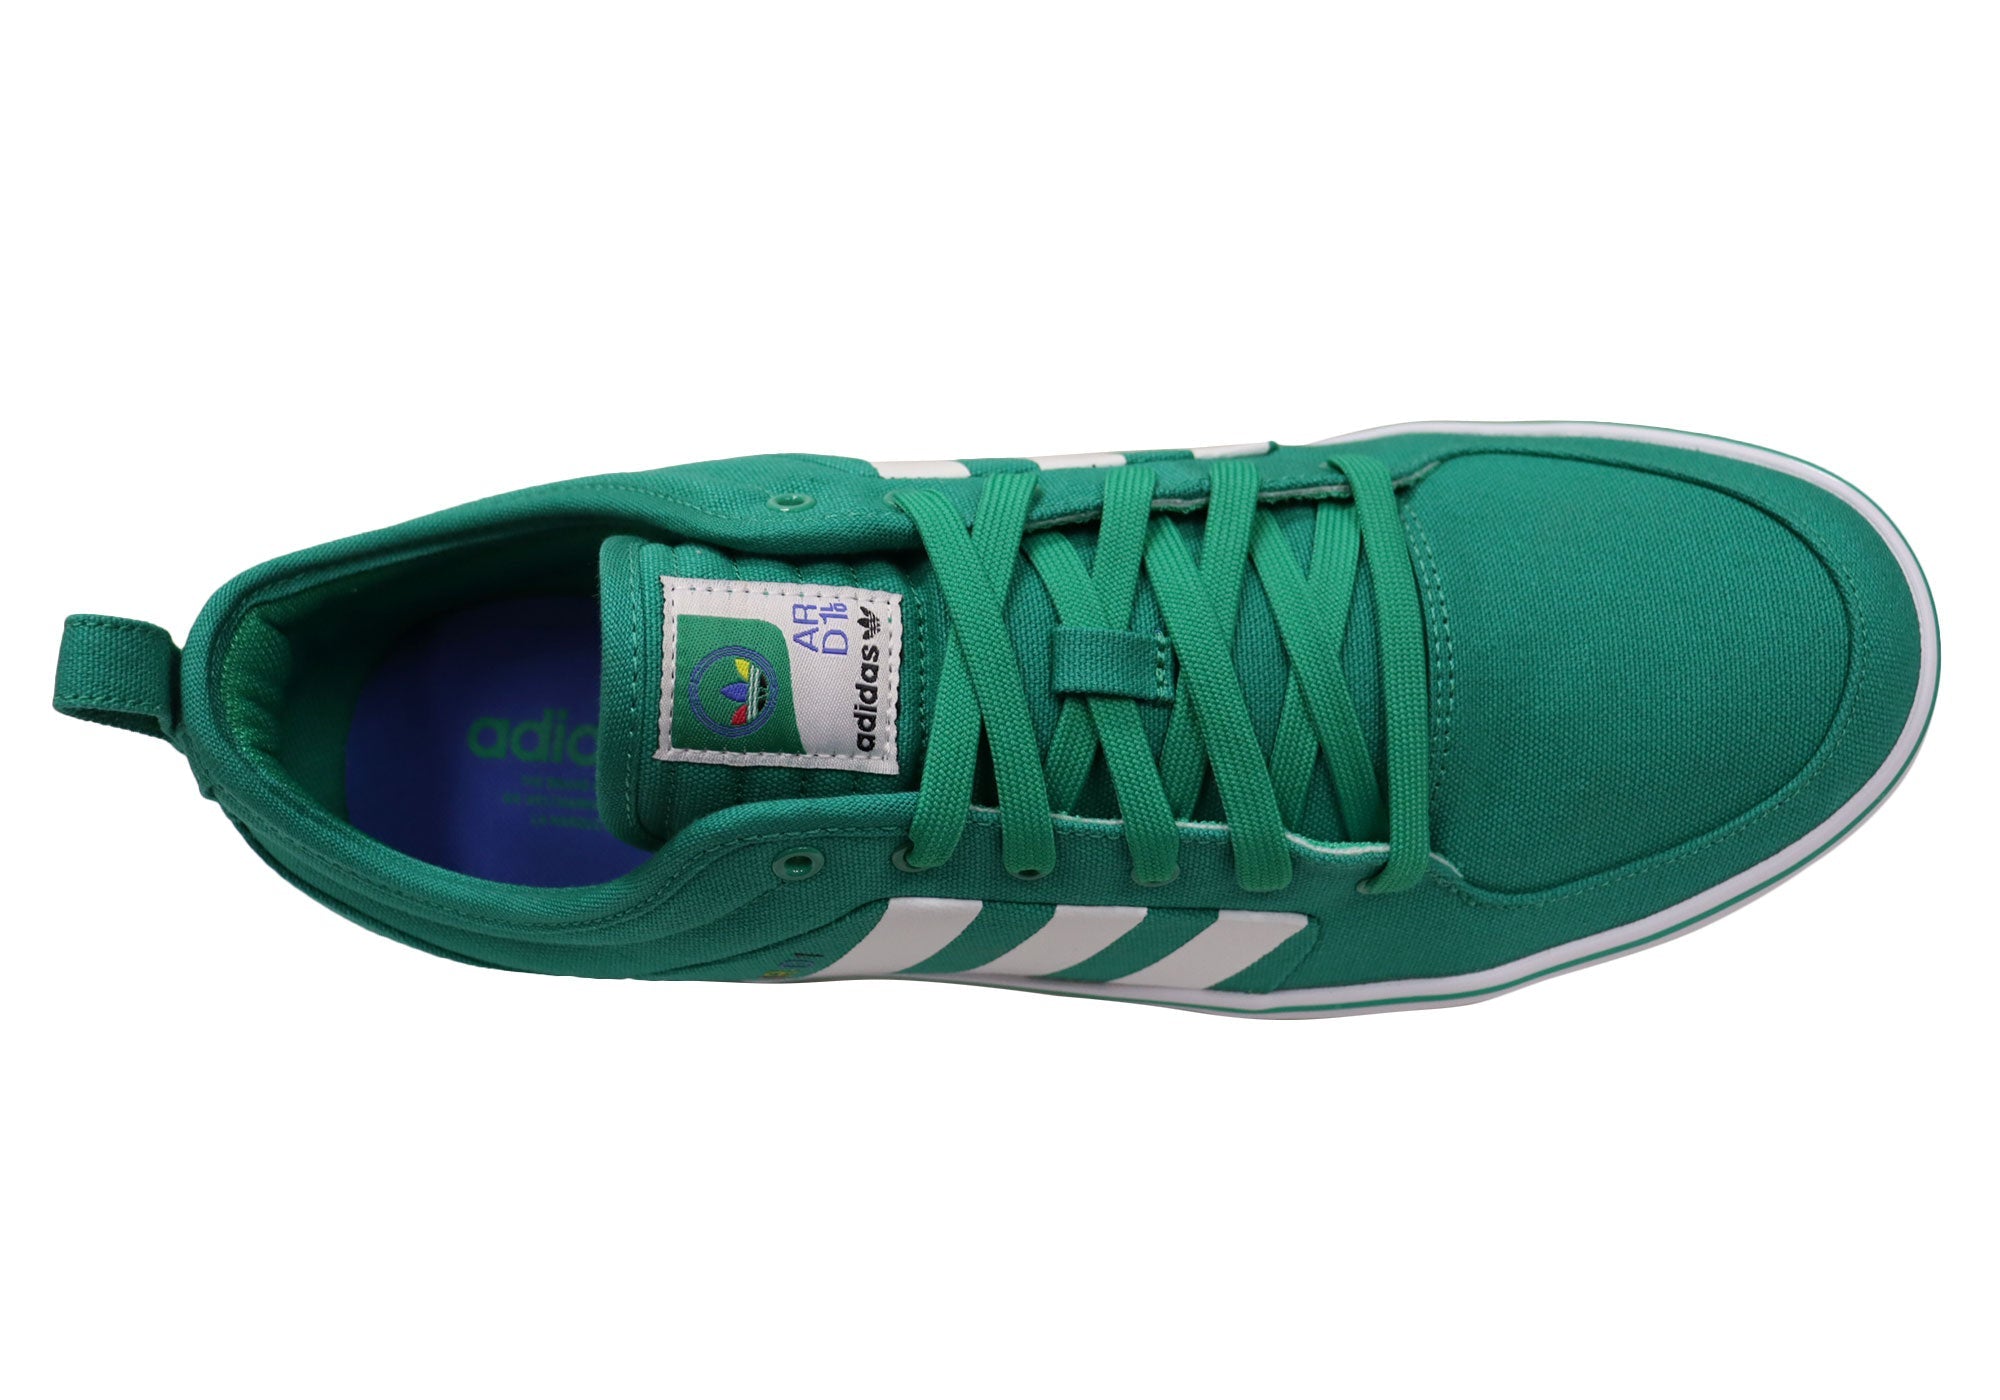 Adidas ARD1 Low Comfortable Lace Up Shoes